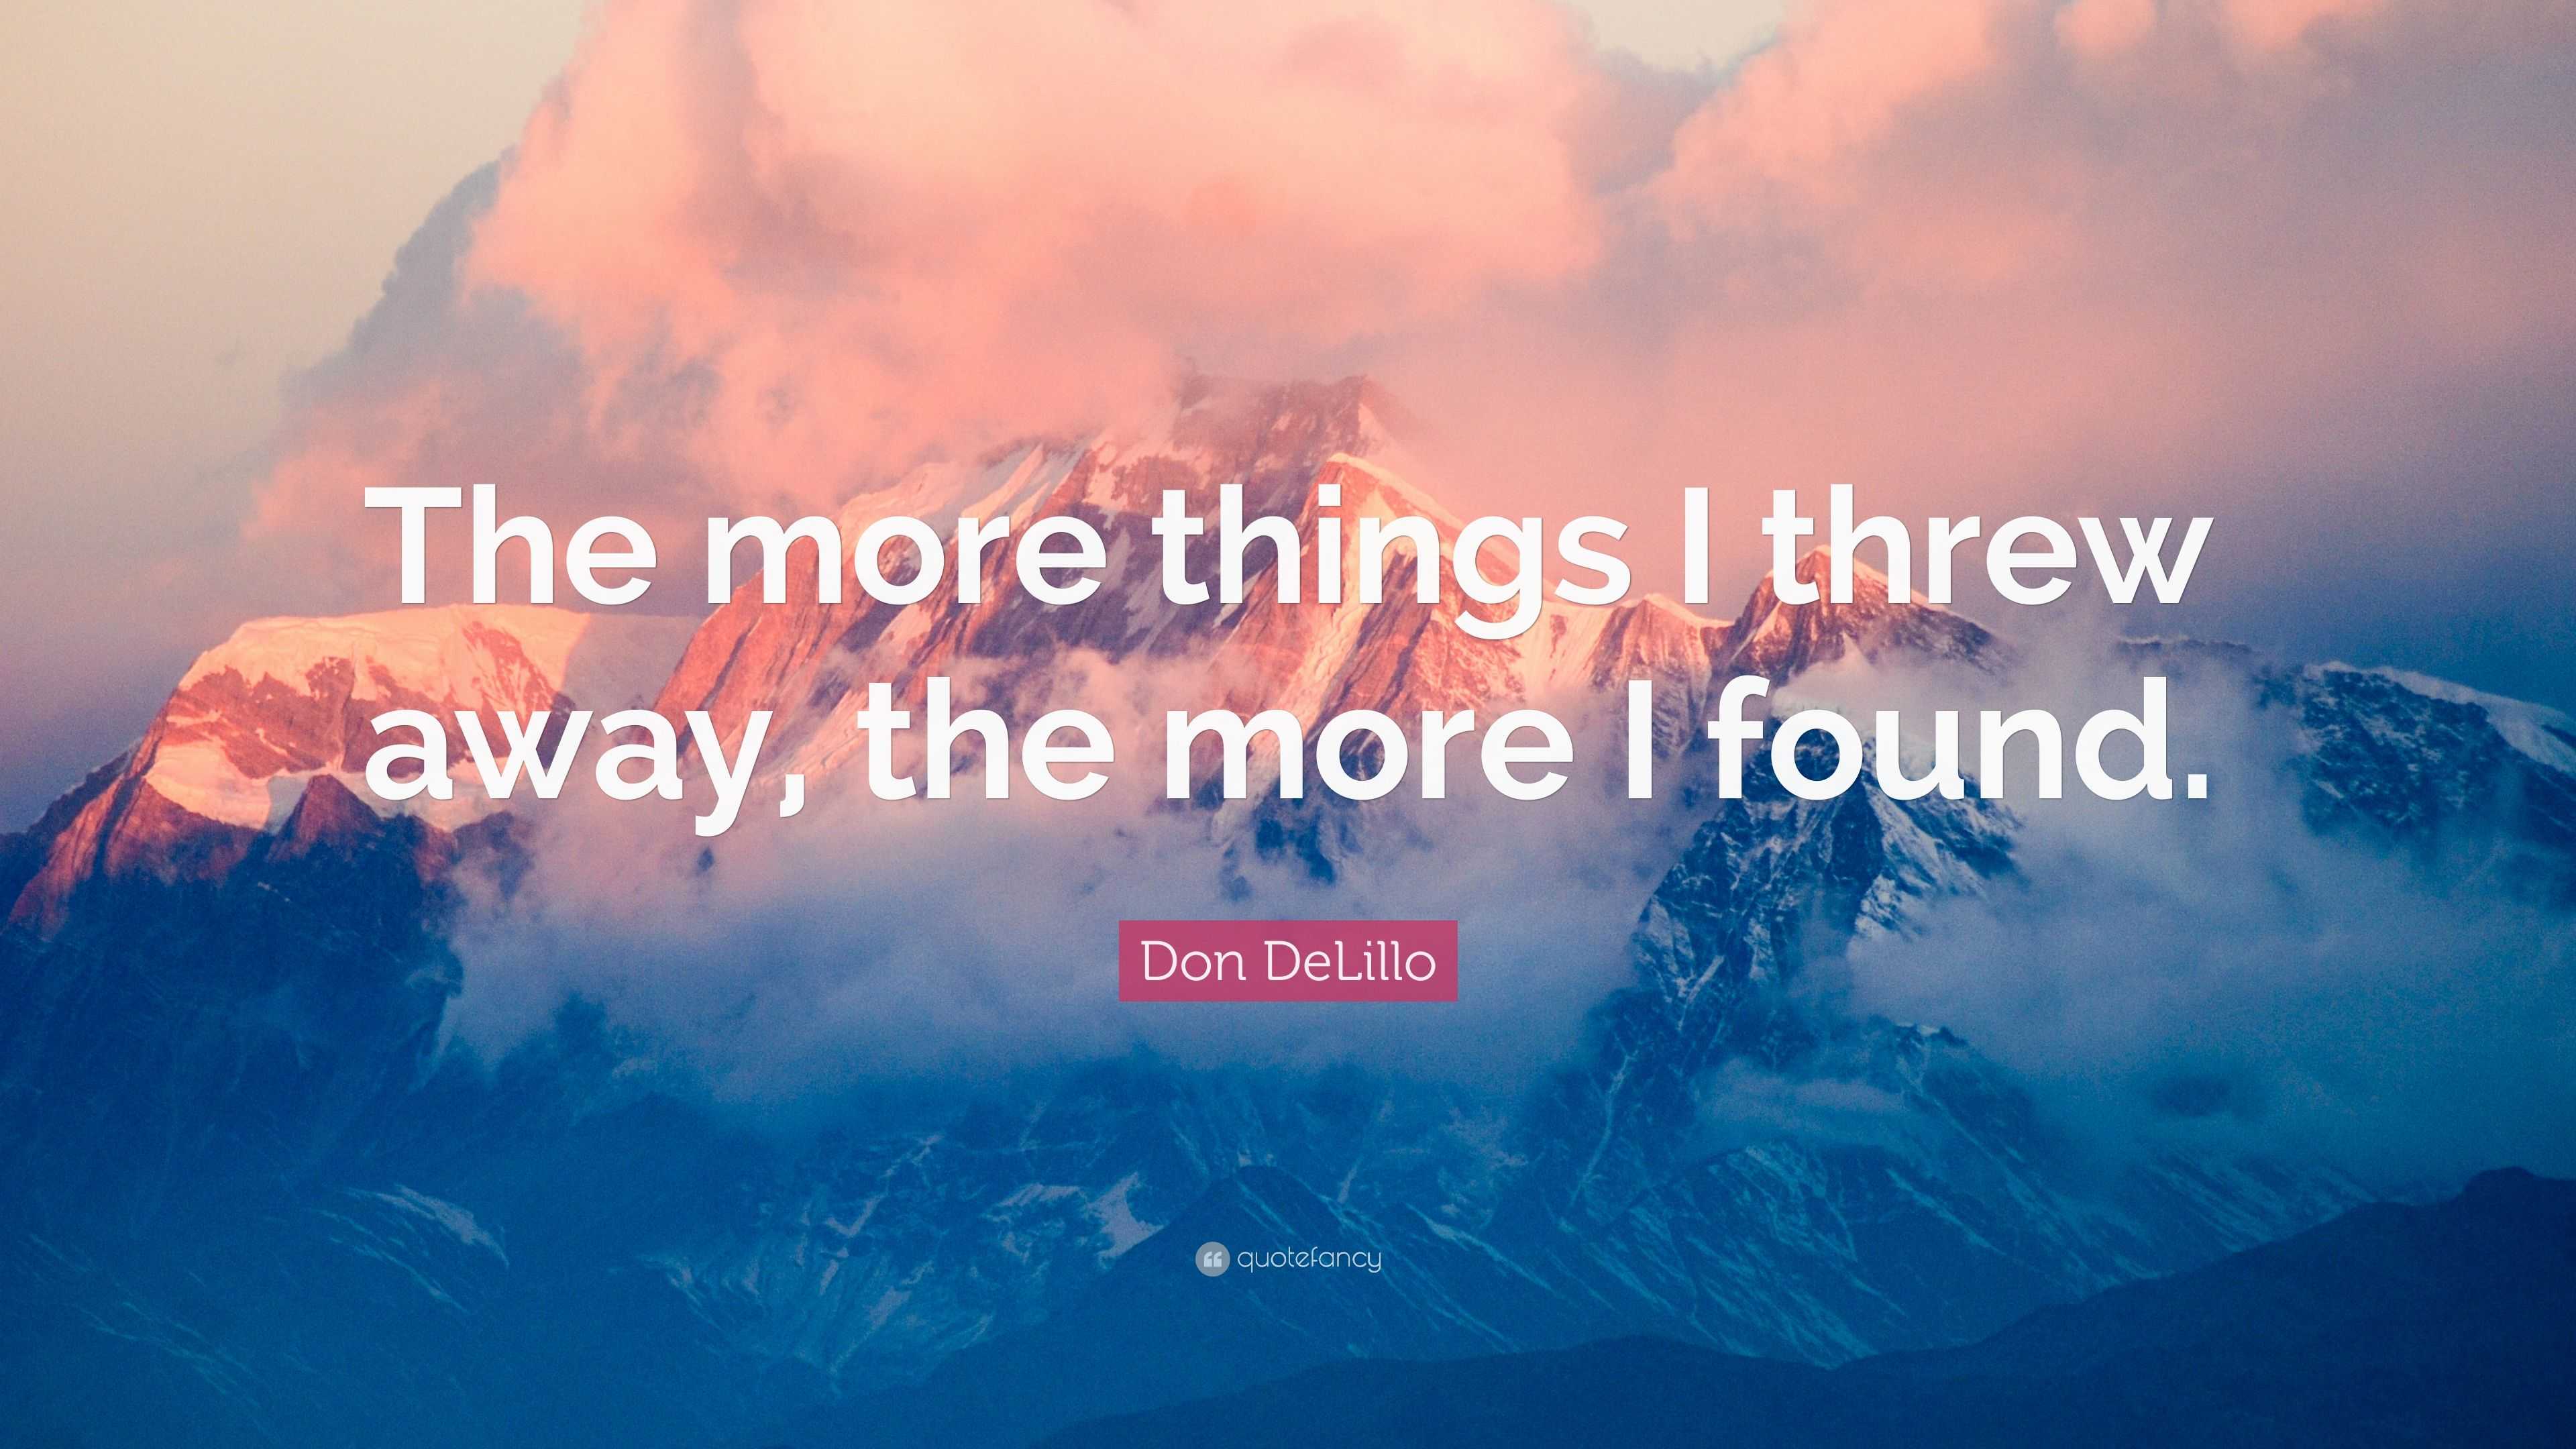 Don DeLillo Quote: “The more things I threw away, the more I found.”